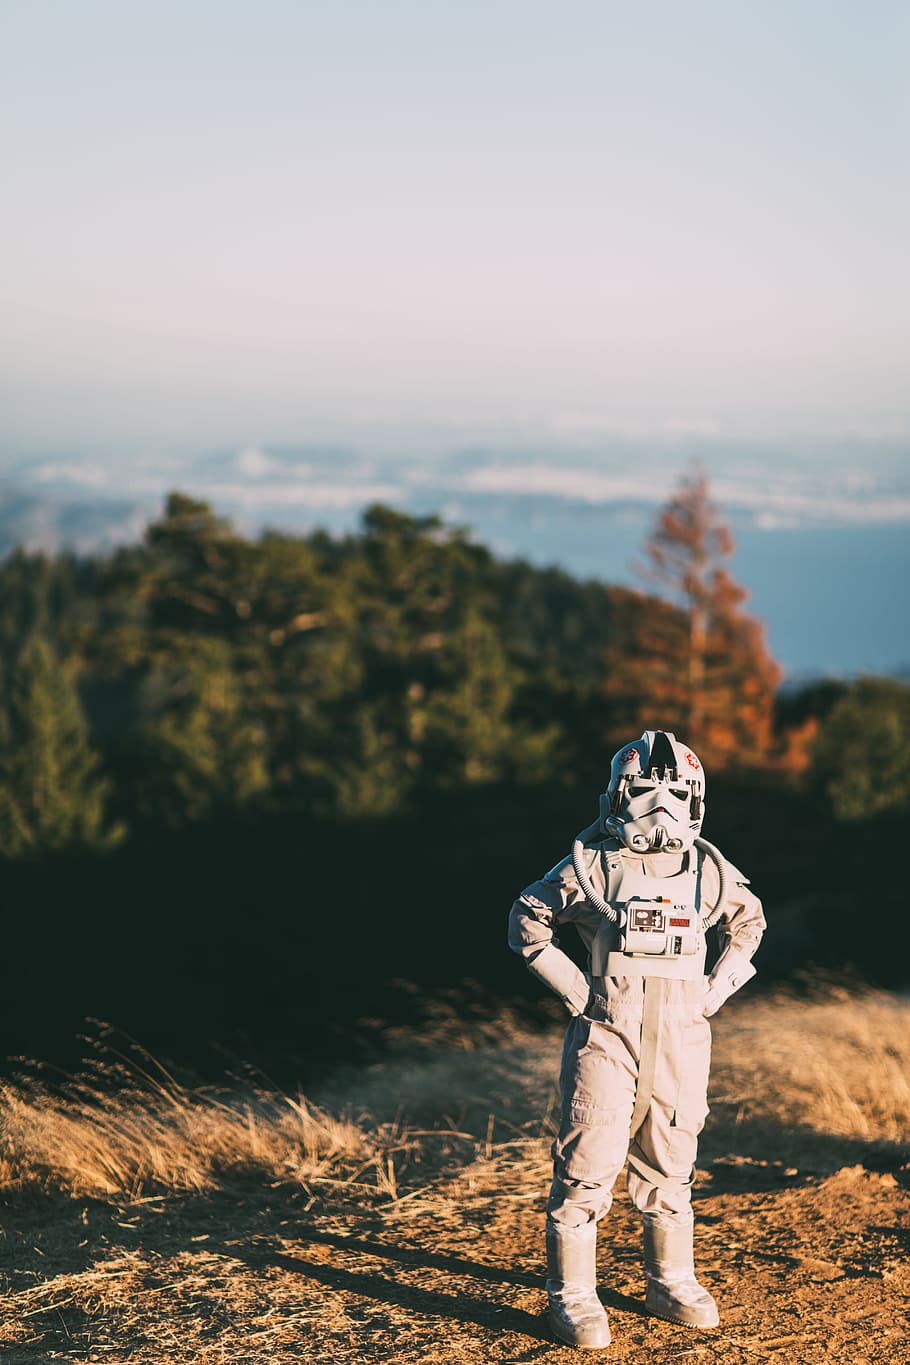 selective focus photography of person wearing Stormtrooper costume, person in Storm Trooper costume standing on ground with green trees background during daytime